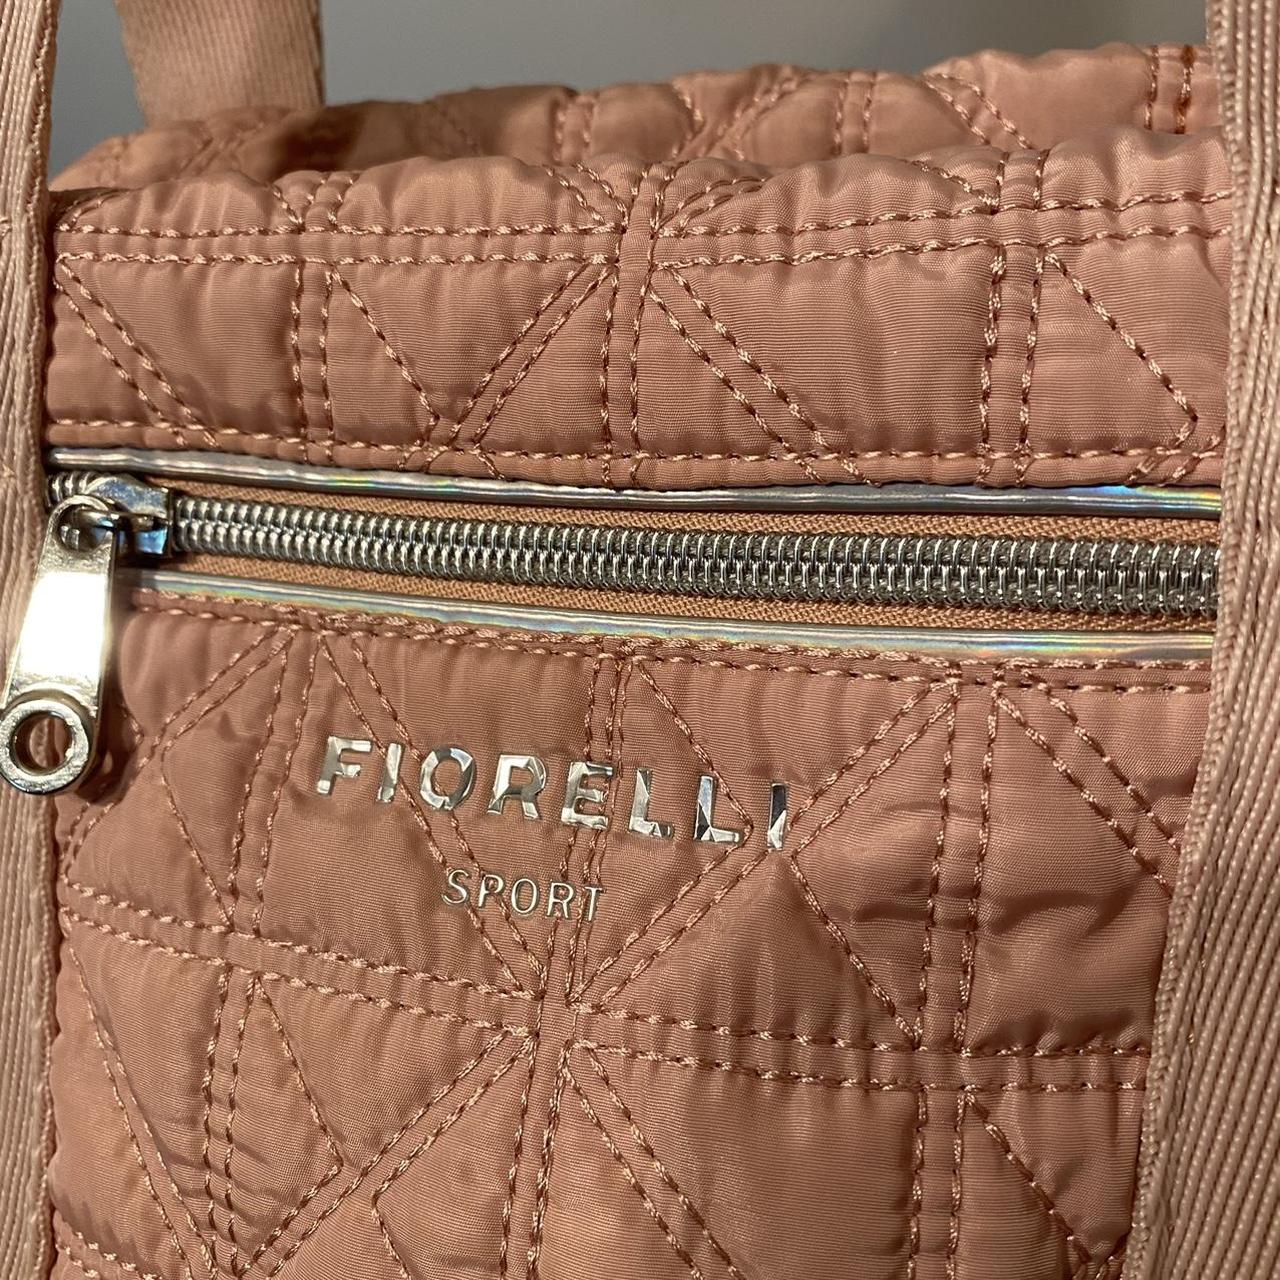 Product Image 2 - Fiorelli Pink Quilted Sport Bag.